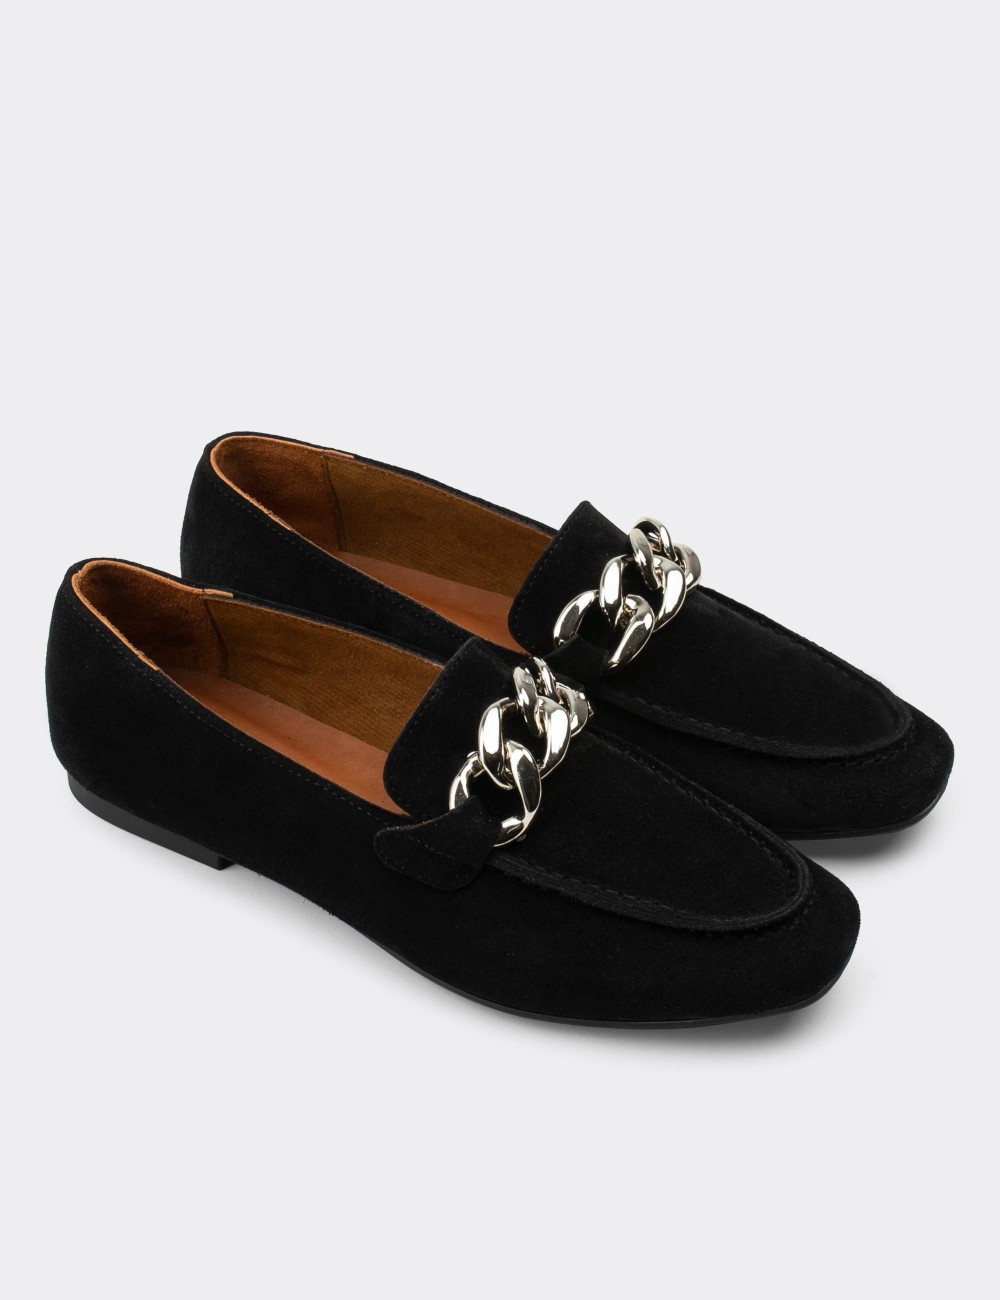 Black Suede Leather Loafers - 01915ZSYHC01